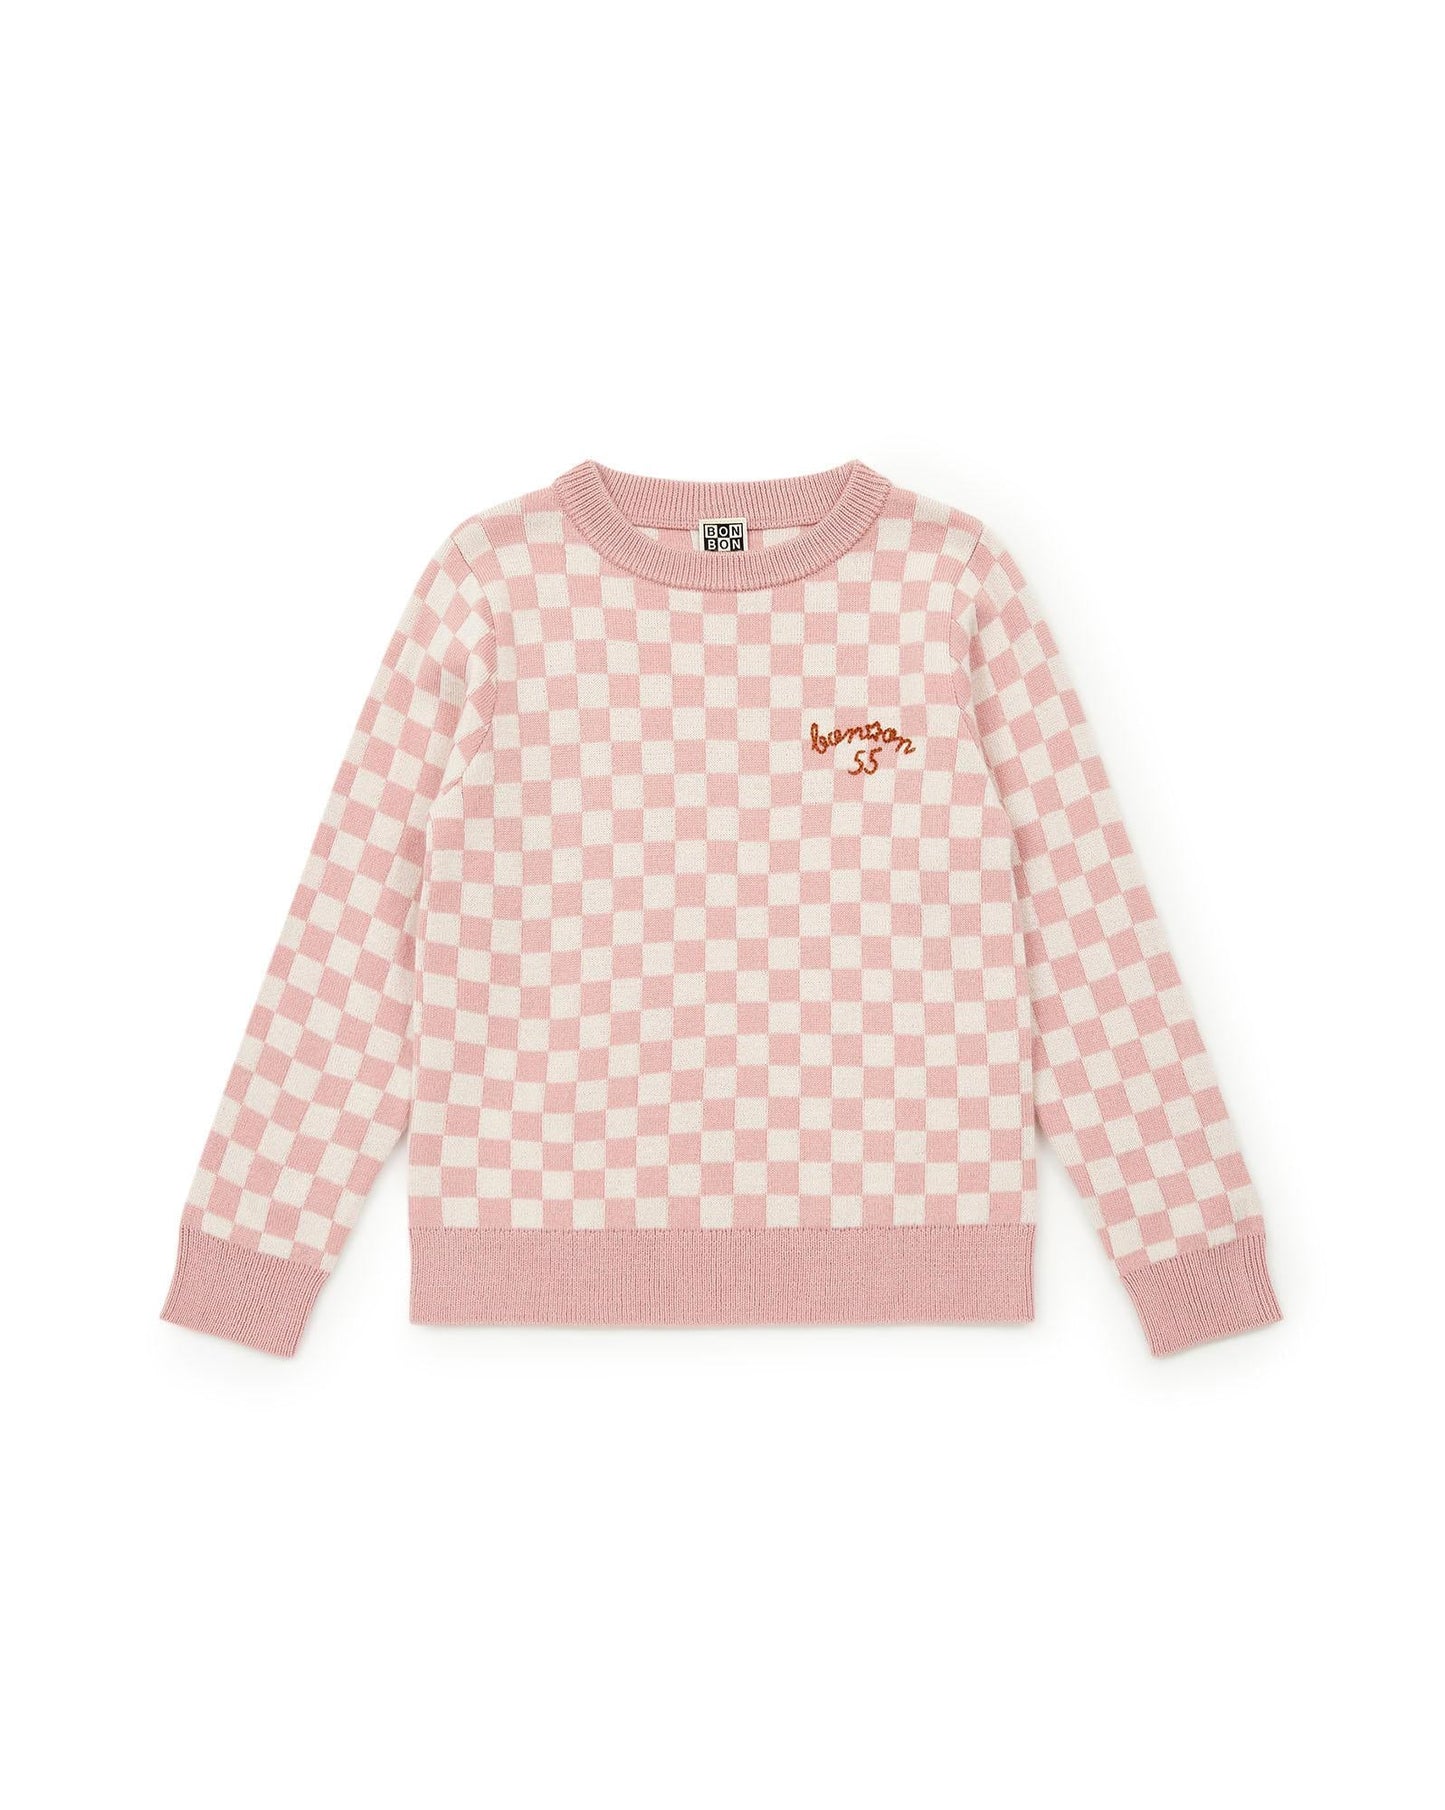 Sweater checkerboard Pink in jacquard knitting